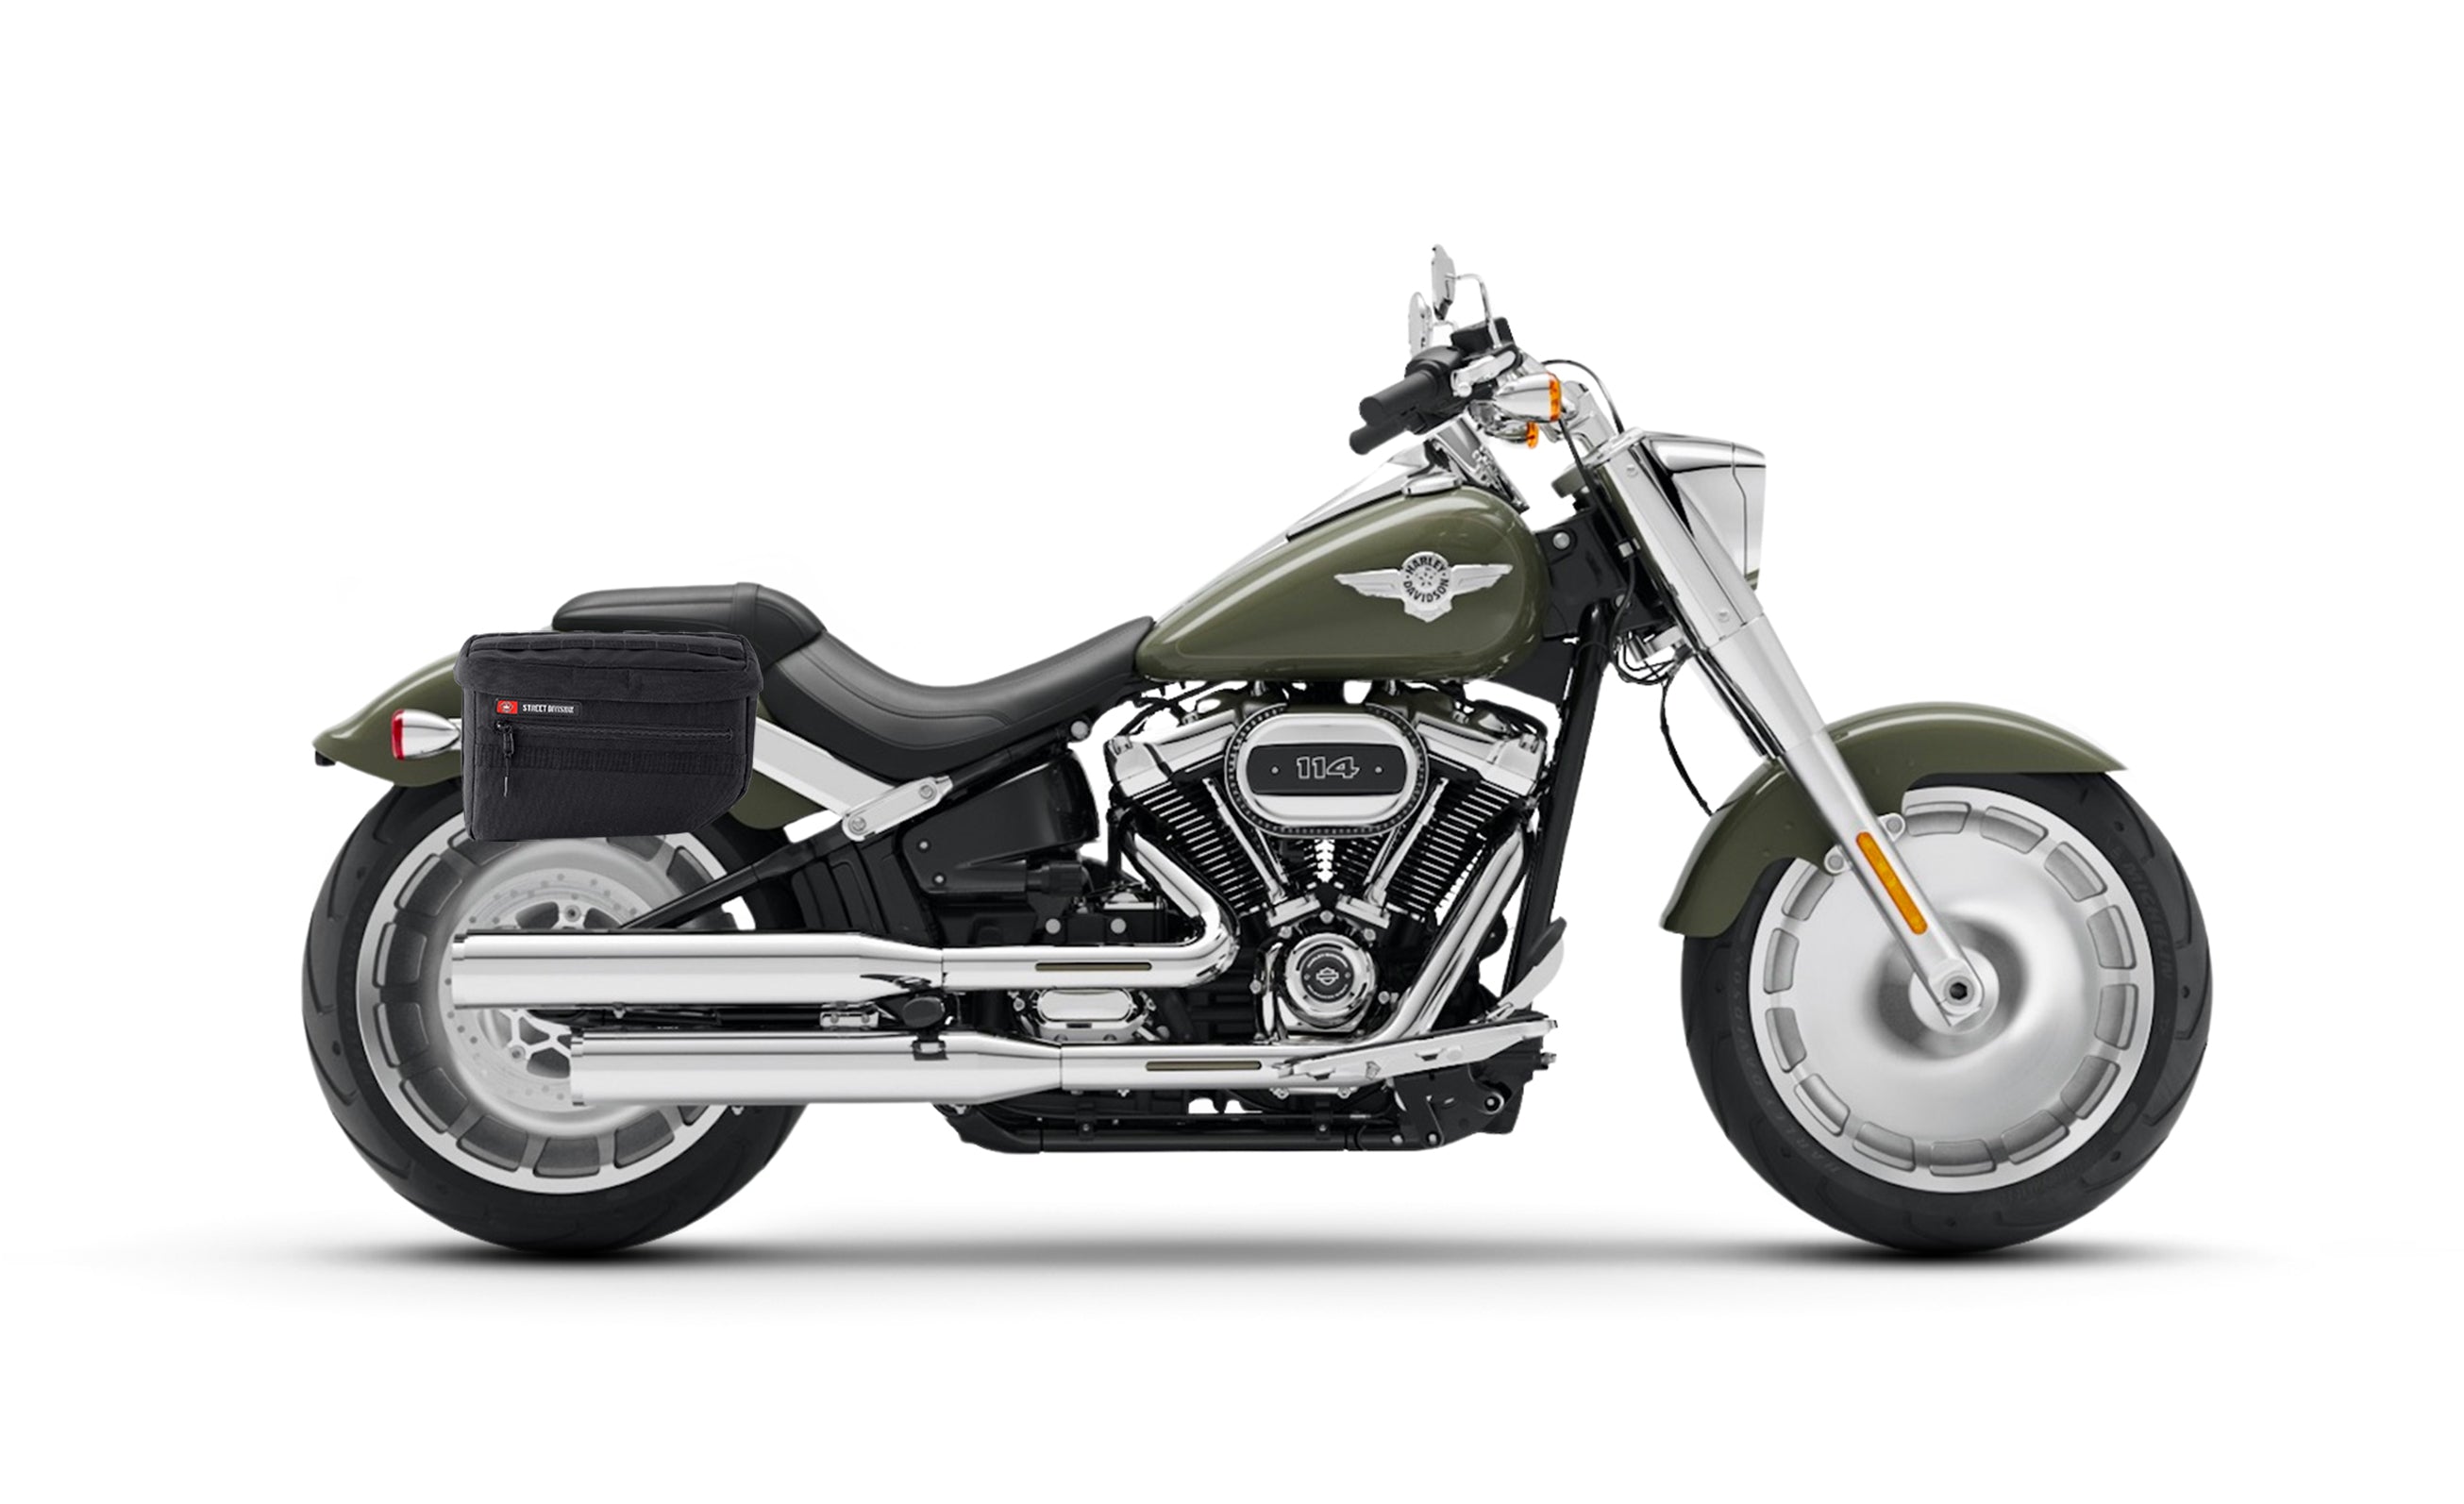 27L - Patriot Large Motorcycle Throw Over Saddlebags for Harley Softail Fat Boy FLFB/S @expand